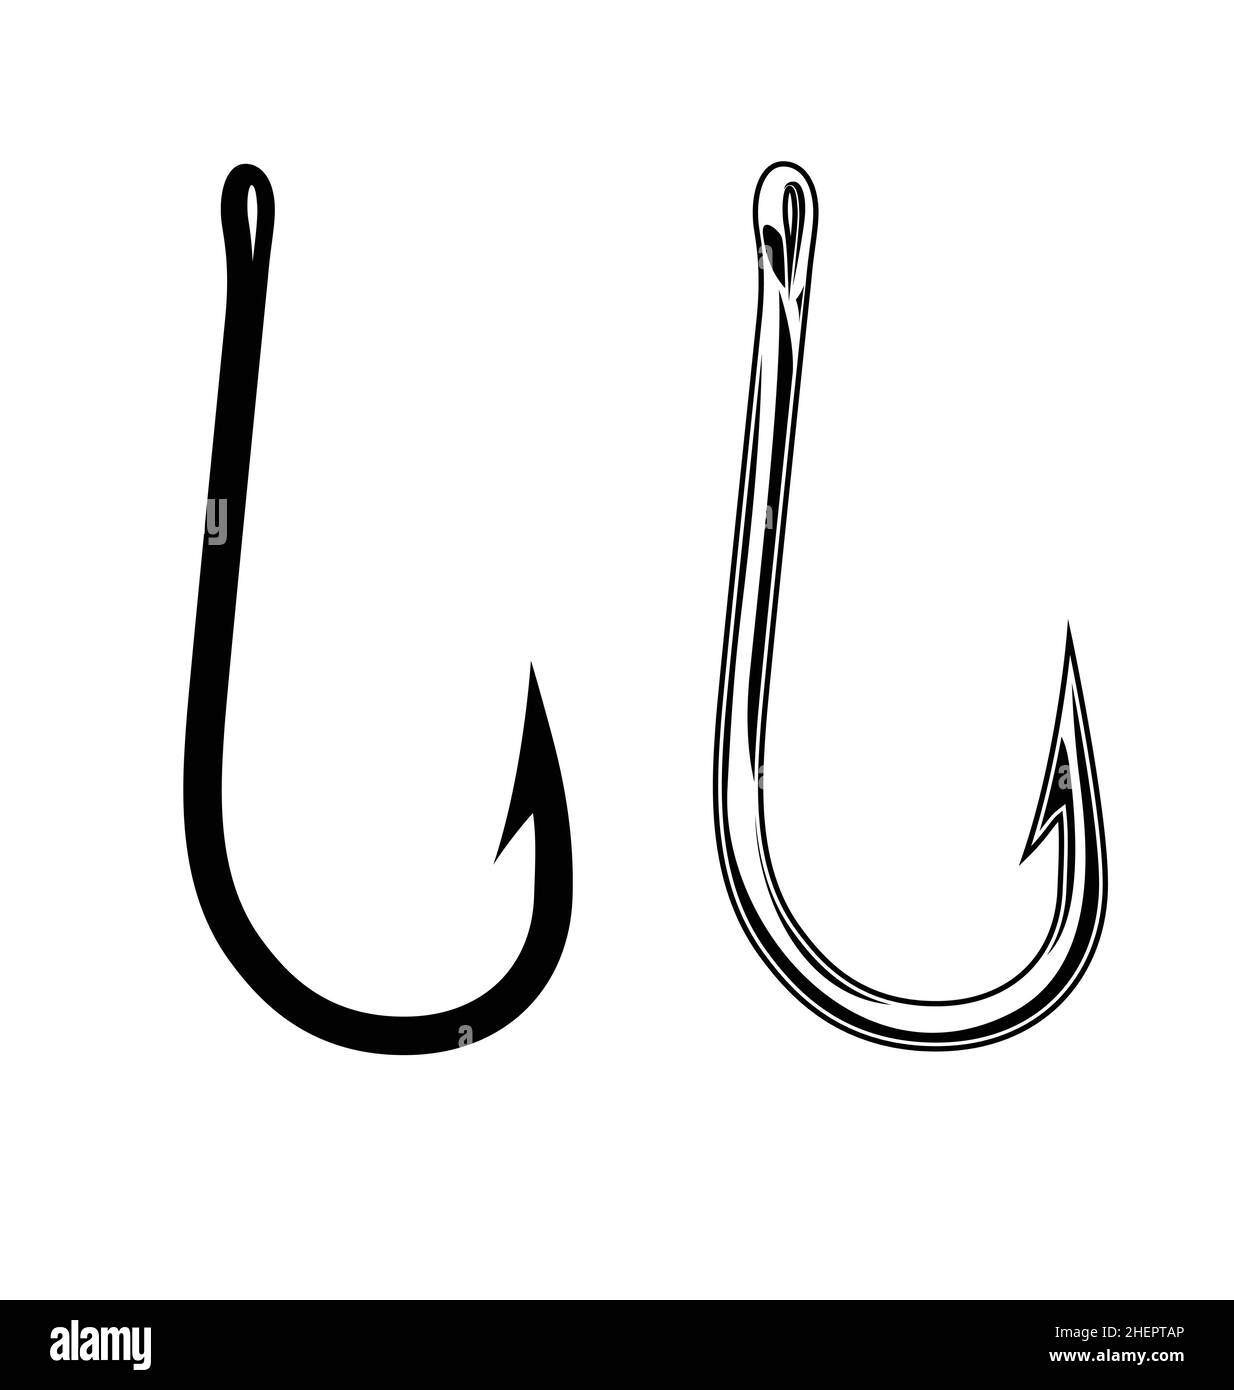 2 simple fishing fish hooks silhouette and chrome set isolated